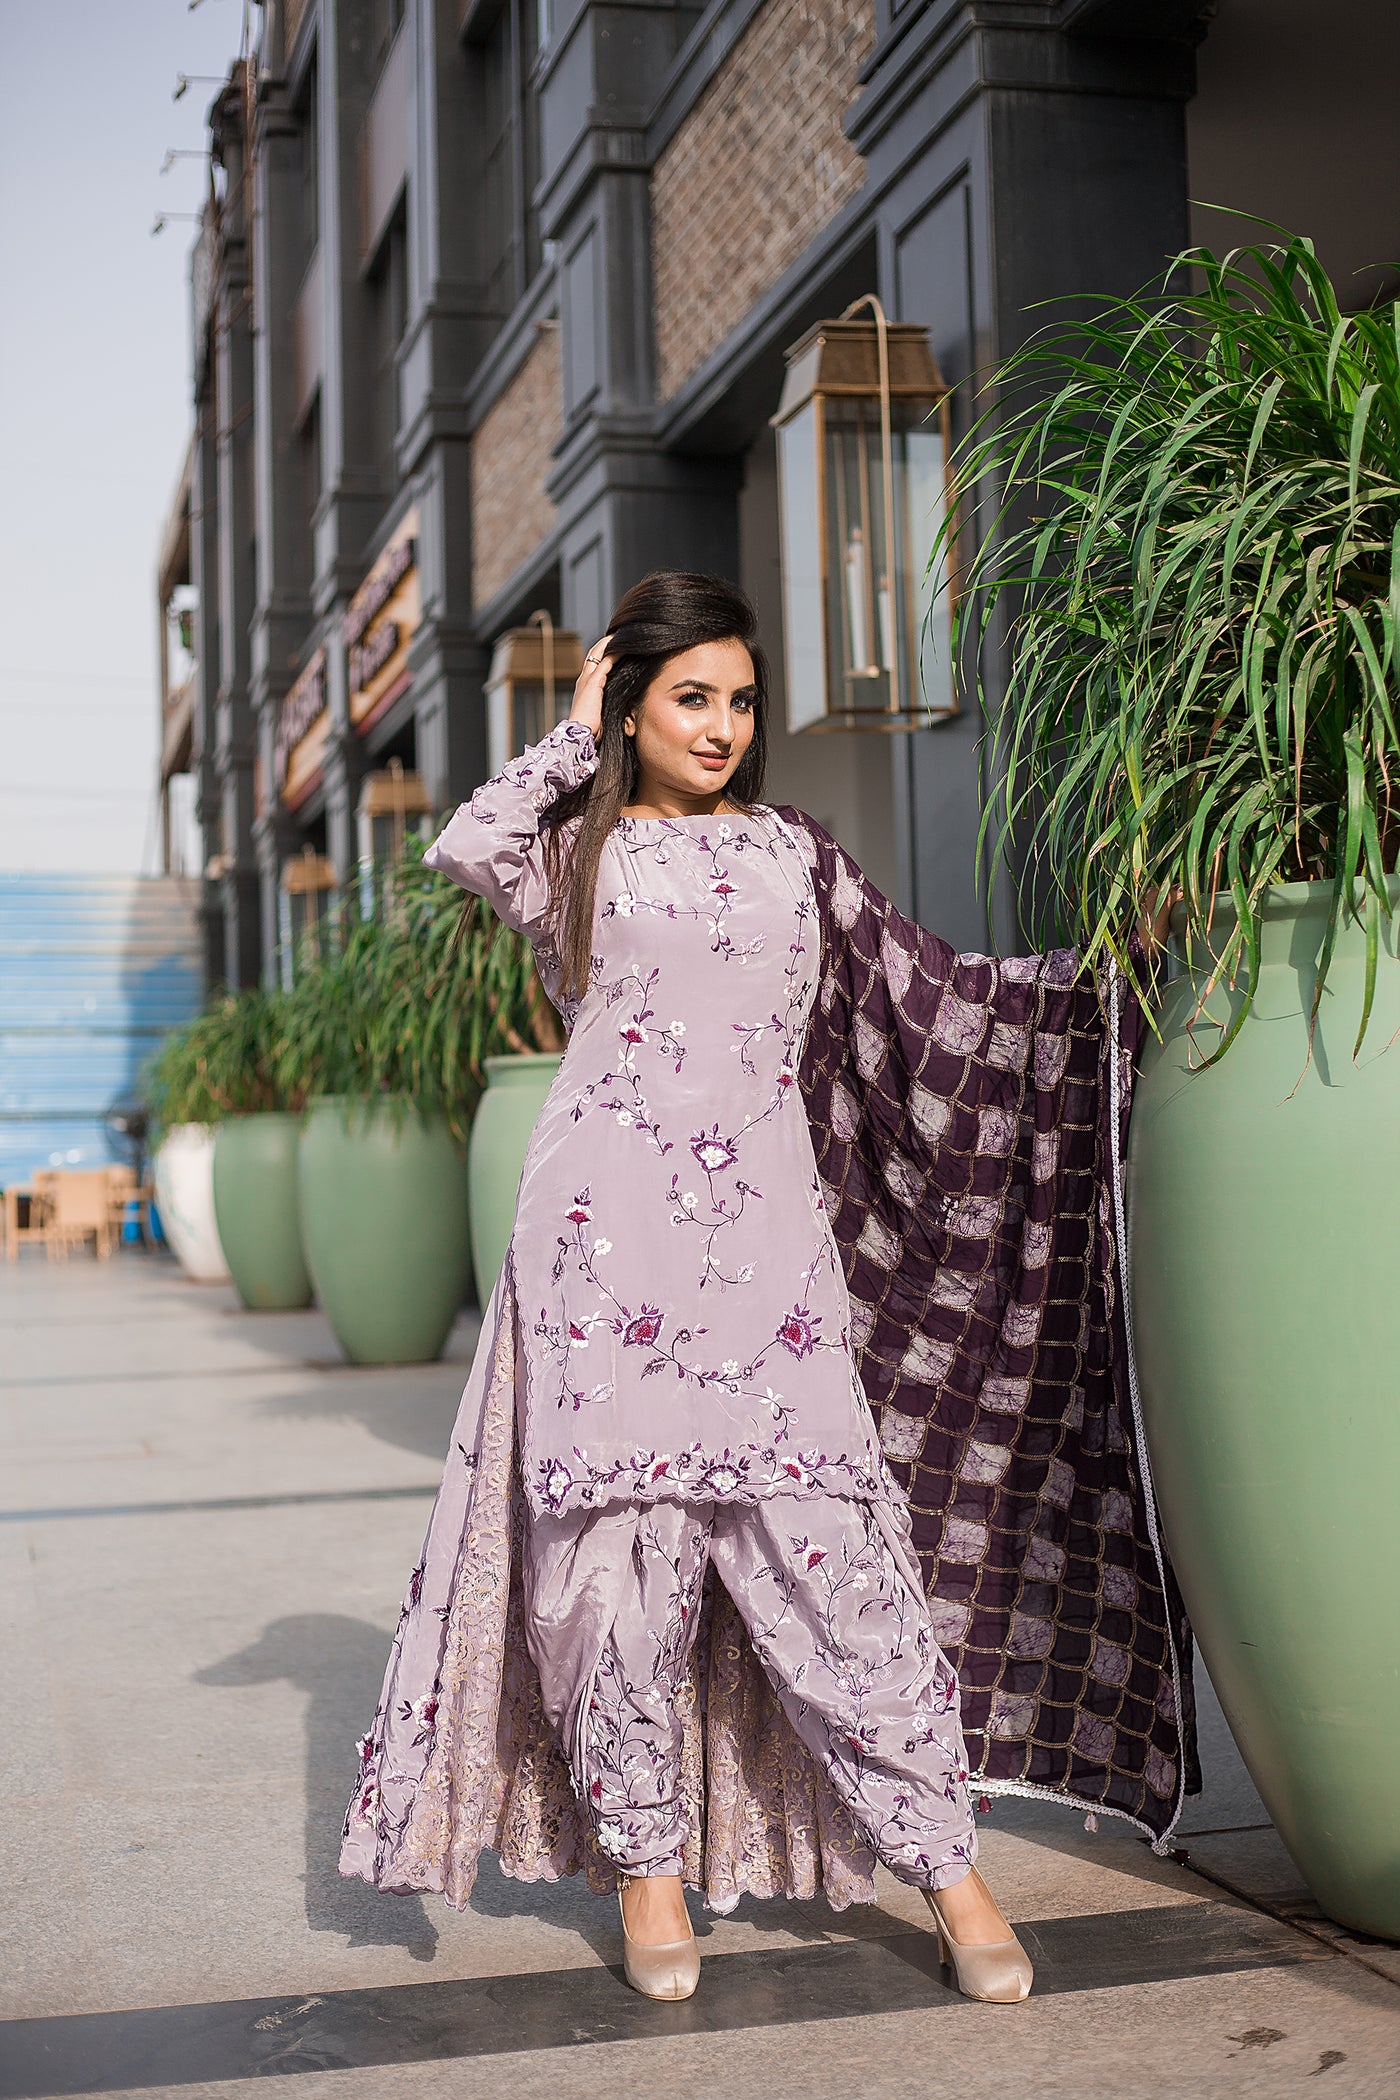 Violet Embroidered Patiala Suit Indian Clothing in Denver, CO, Aurora, CO, Boulder, CO, Fort Collins, CO, Colorado Springs, CO, Parker, CO, Highlands Ranch, CO, Cherry Creek, CO, Centennial, CO, and Longmont, CO. NATIONWIDE SHIPPING USA- India Fashion X